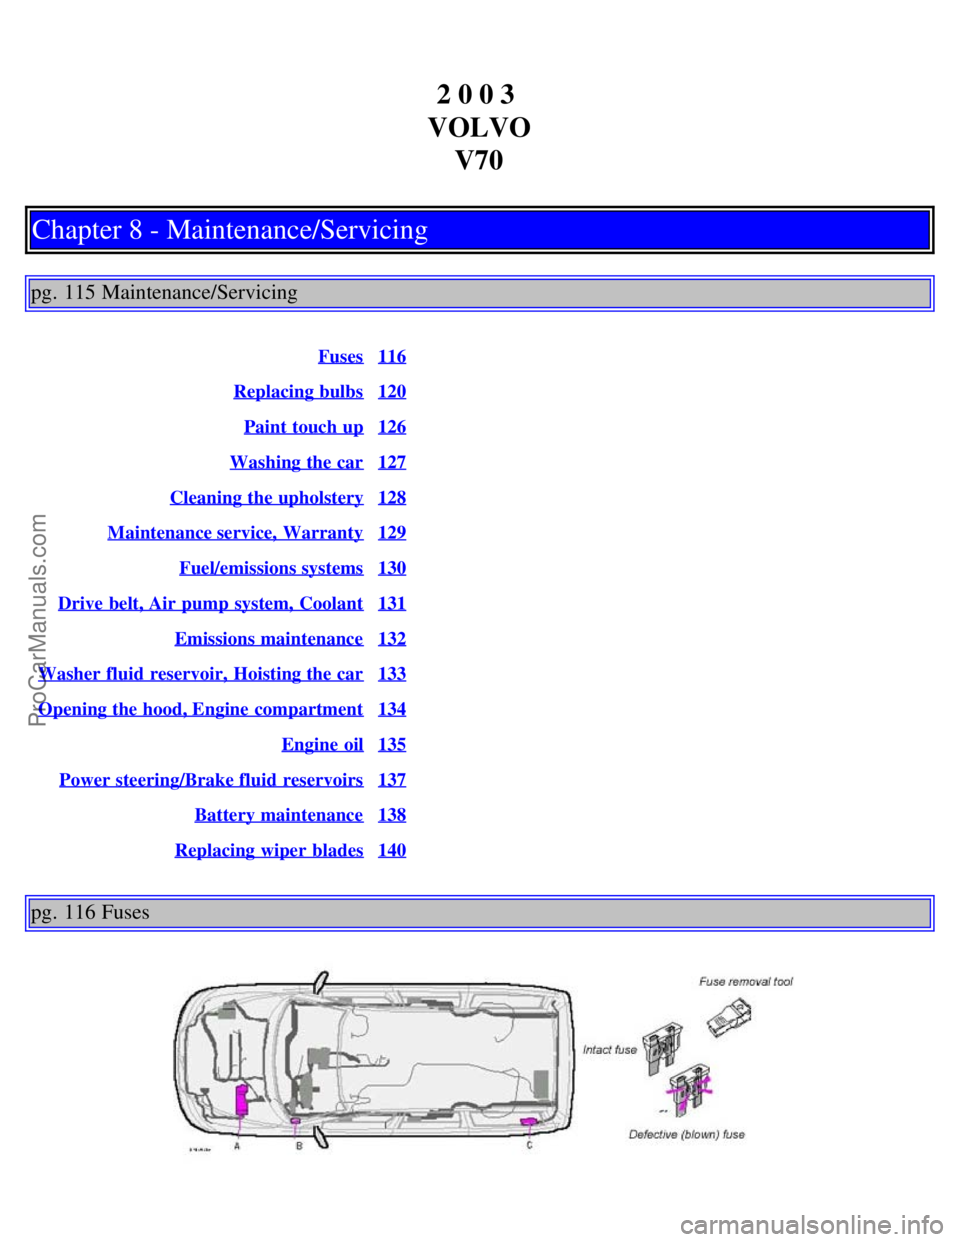 VOLVO V70 2003  Owners Manual 2 0 0 3 
VOLVO V70
Chapter 8 - Maintenance/Servicing
pg. 115 Maintenance/Servicing
Fuses116
Replacing bulbs120
Paint touch up126
Washing the car127
Cleaning the upholstery128
Maintenance service,  War